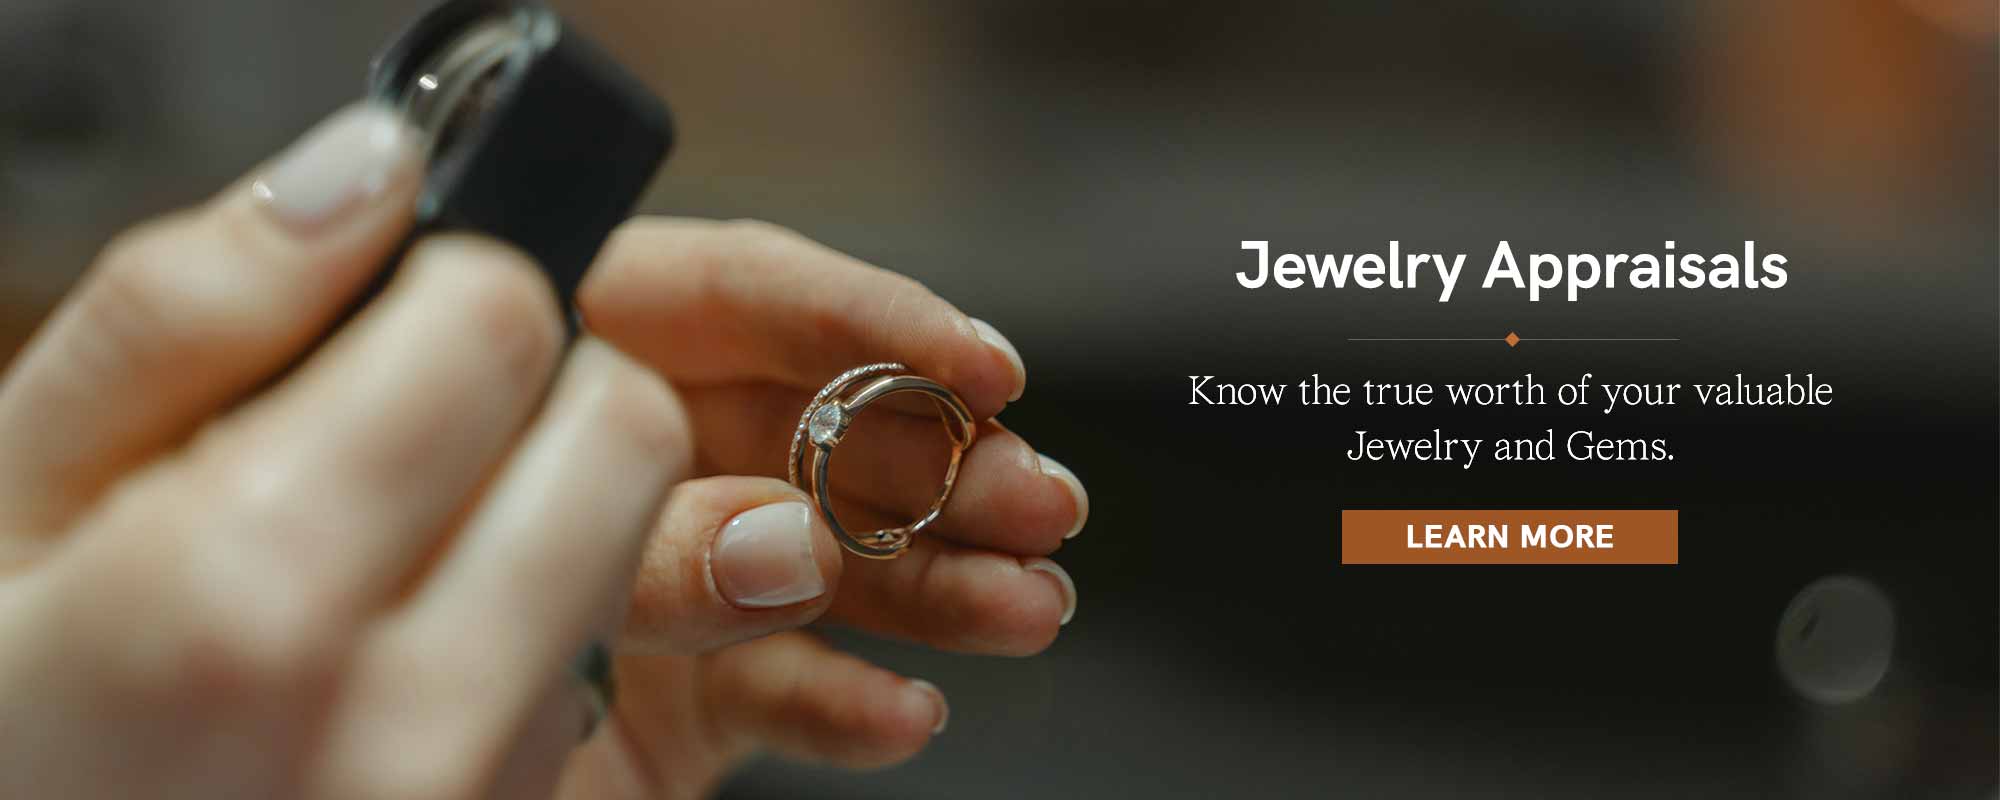 Jewelry Appraisals at Quality Jewelers